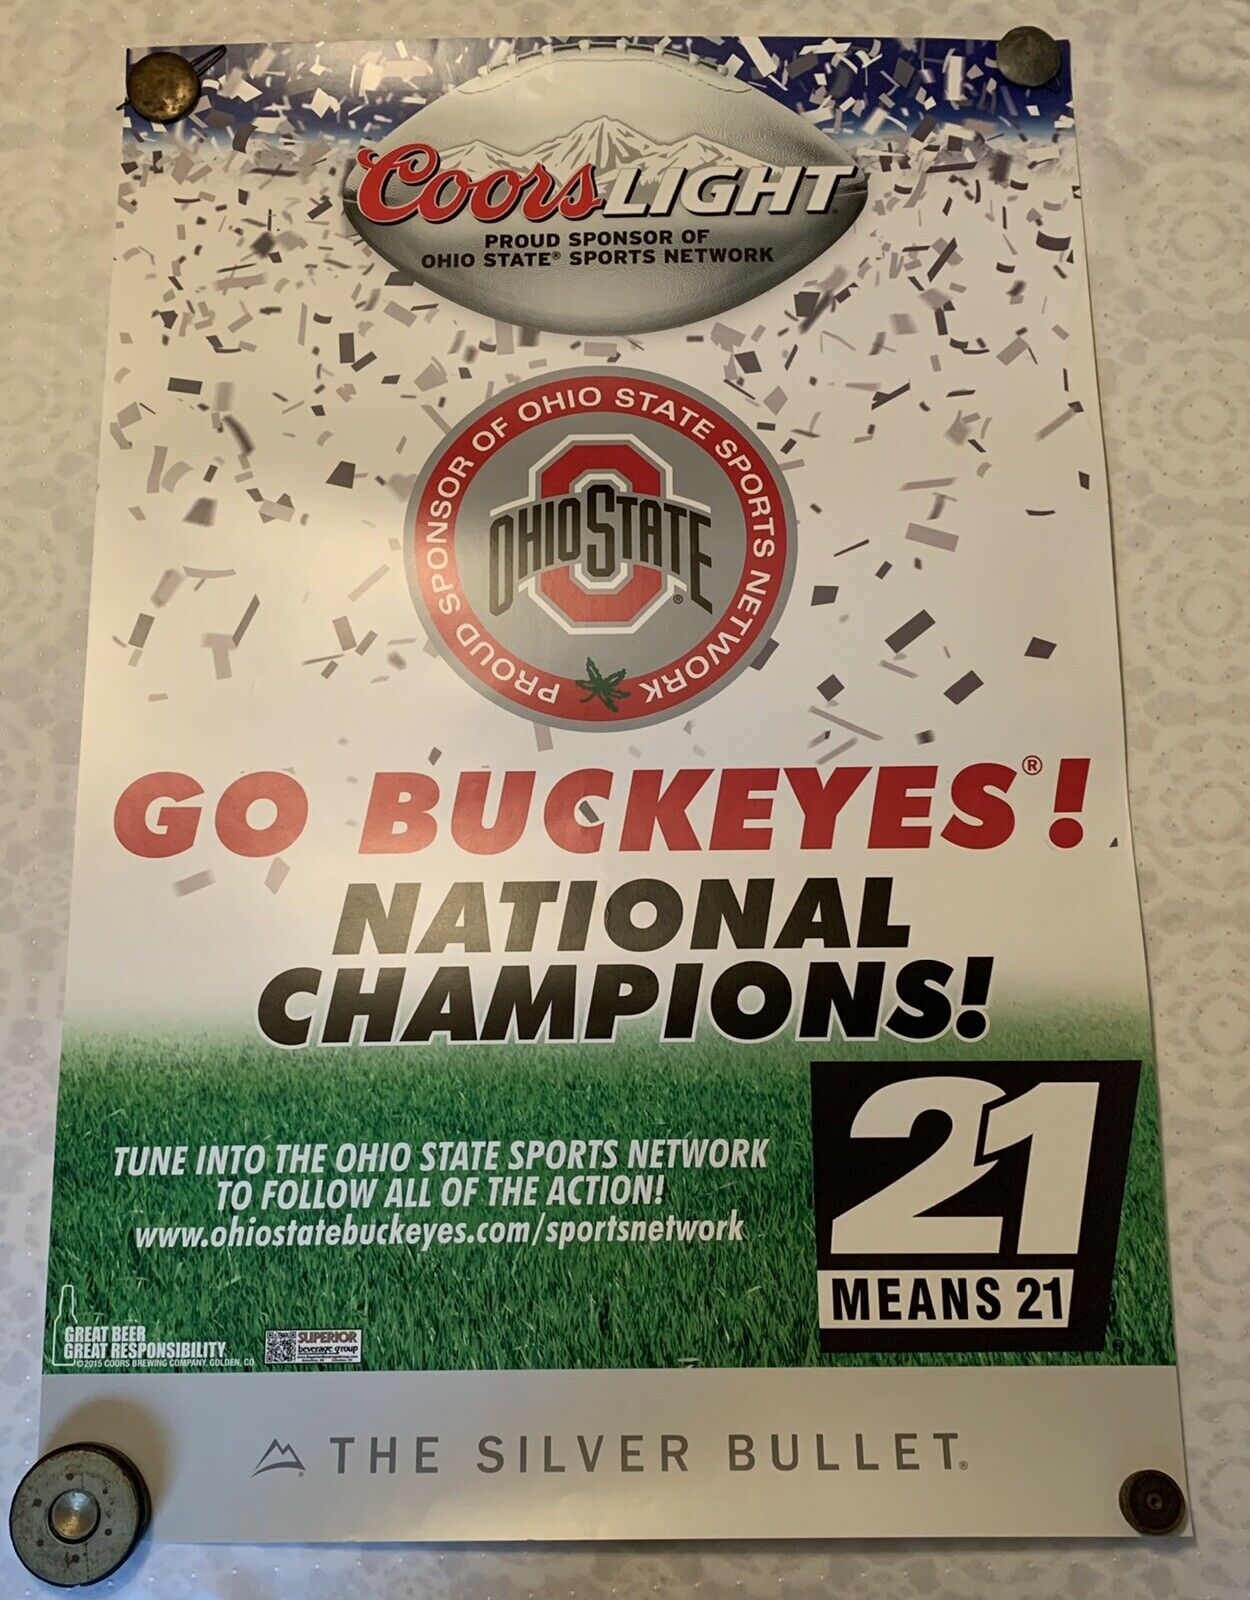 Coors Light Ohio State Go Buckeyes 2015 National Champions! Advertising Poster